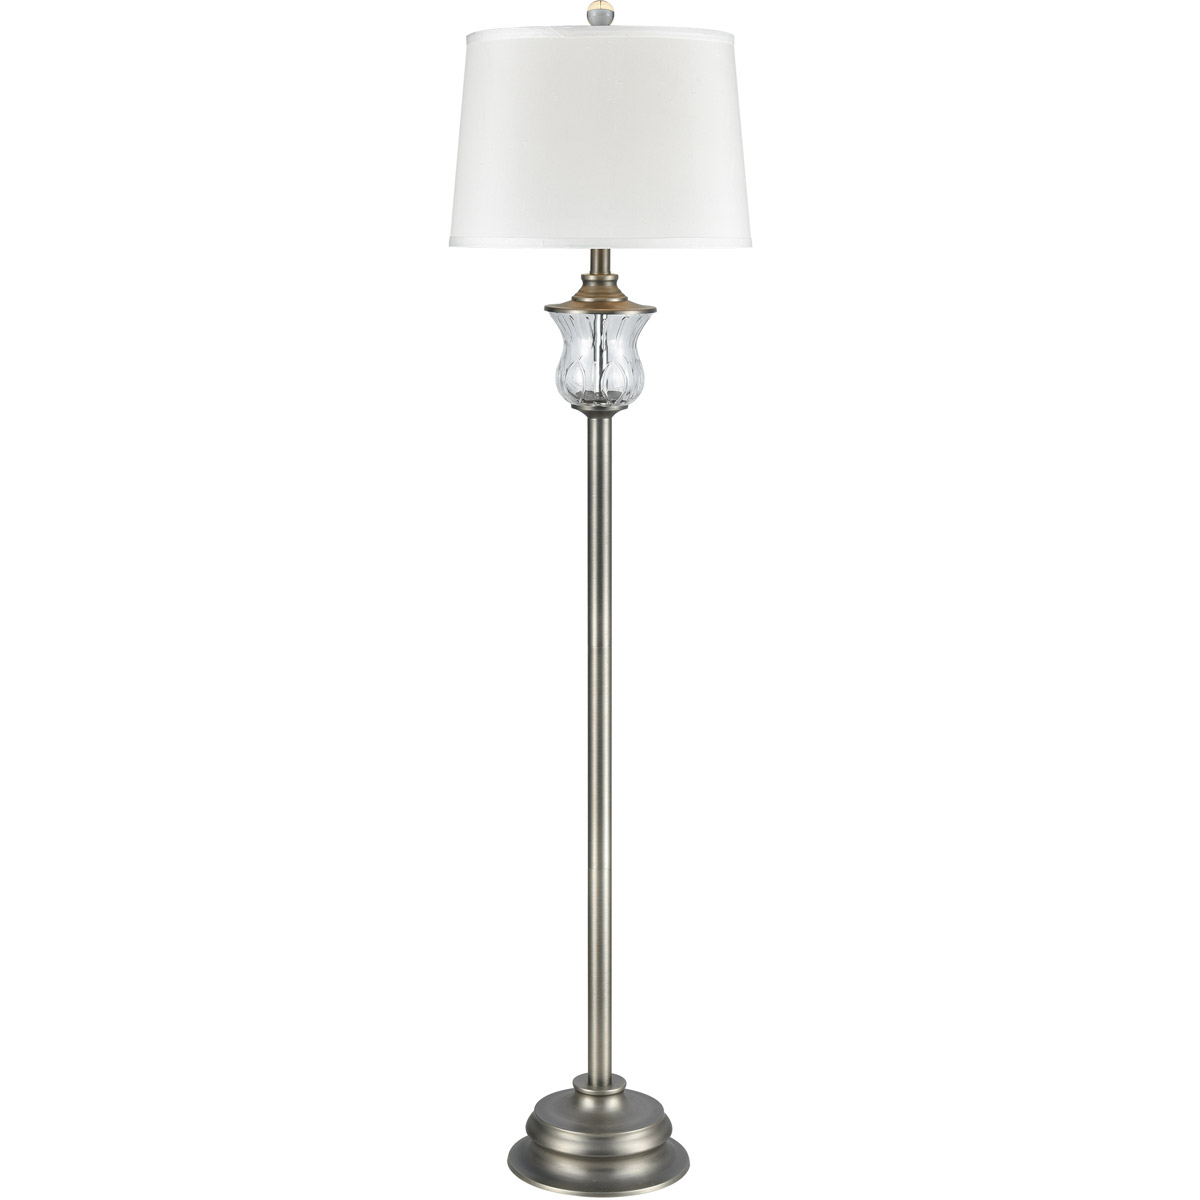 Details About Dale Tiffany Sgf17177 Esteban Floor Lamp Antique Nickel within size 1200 X 1200